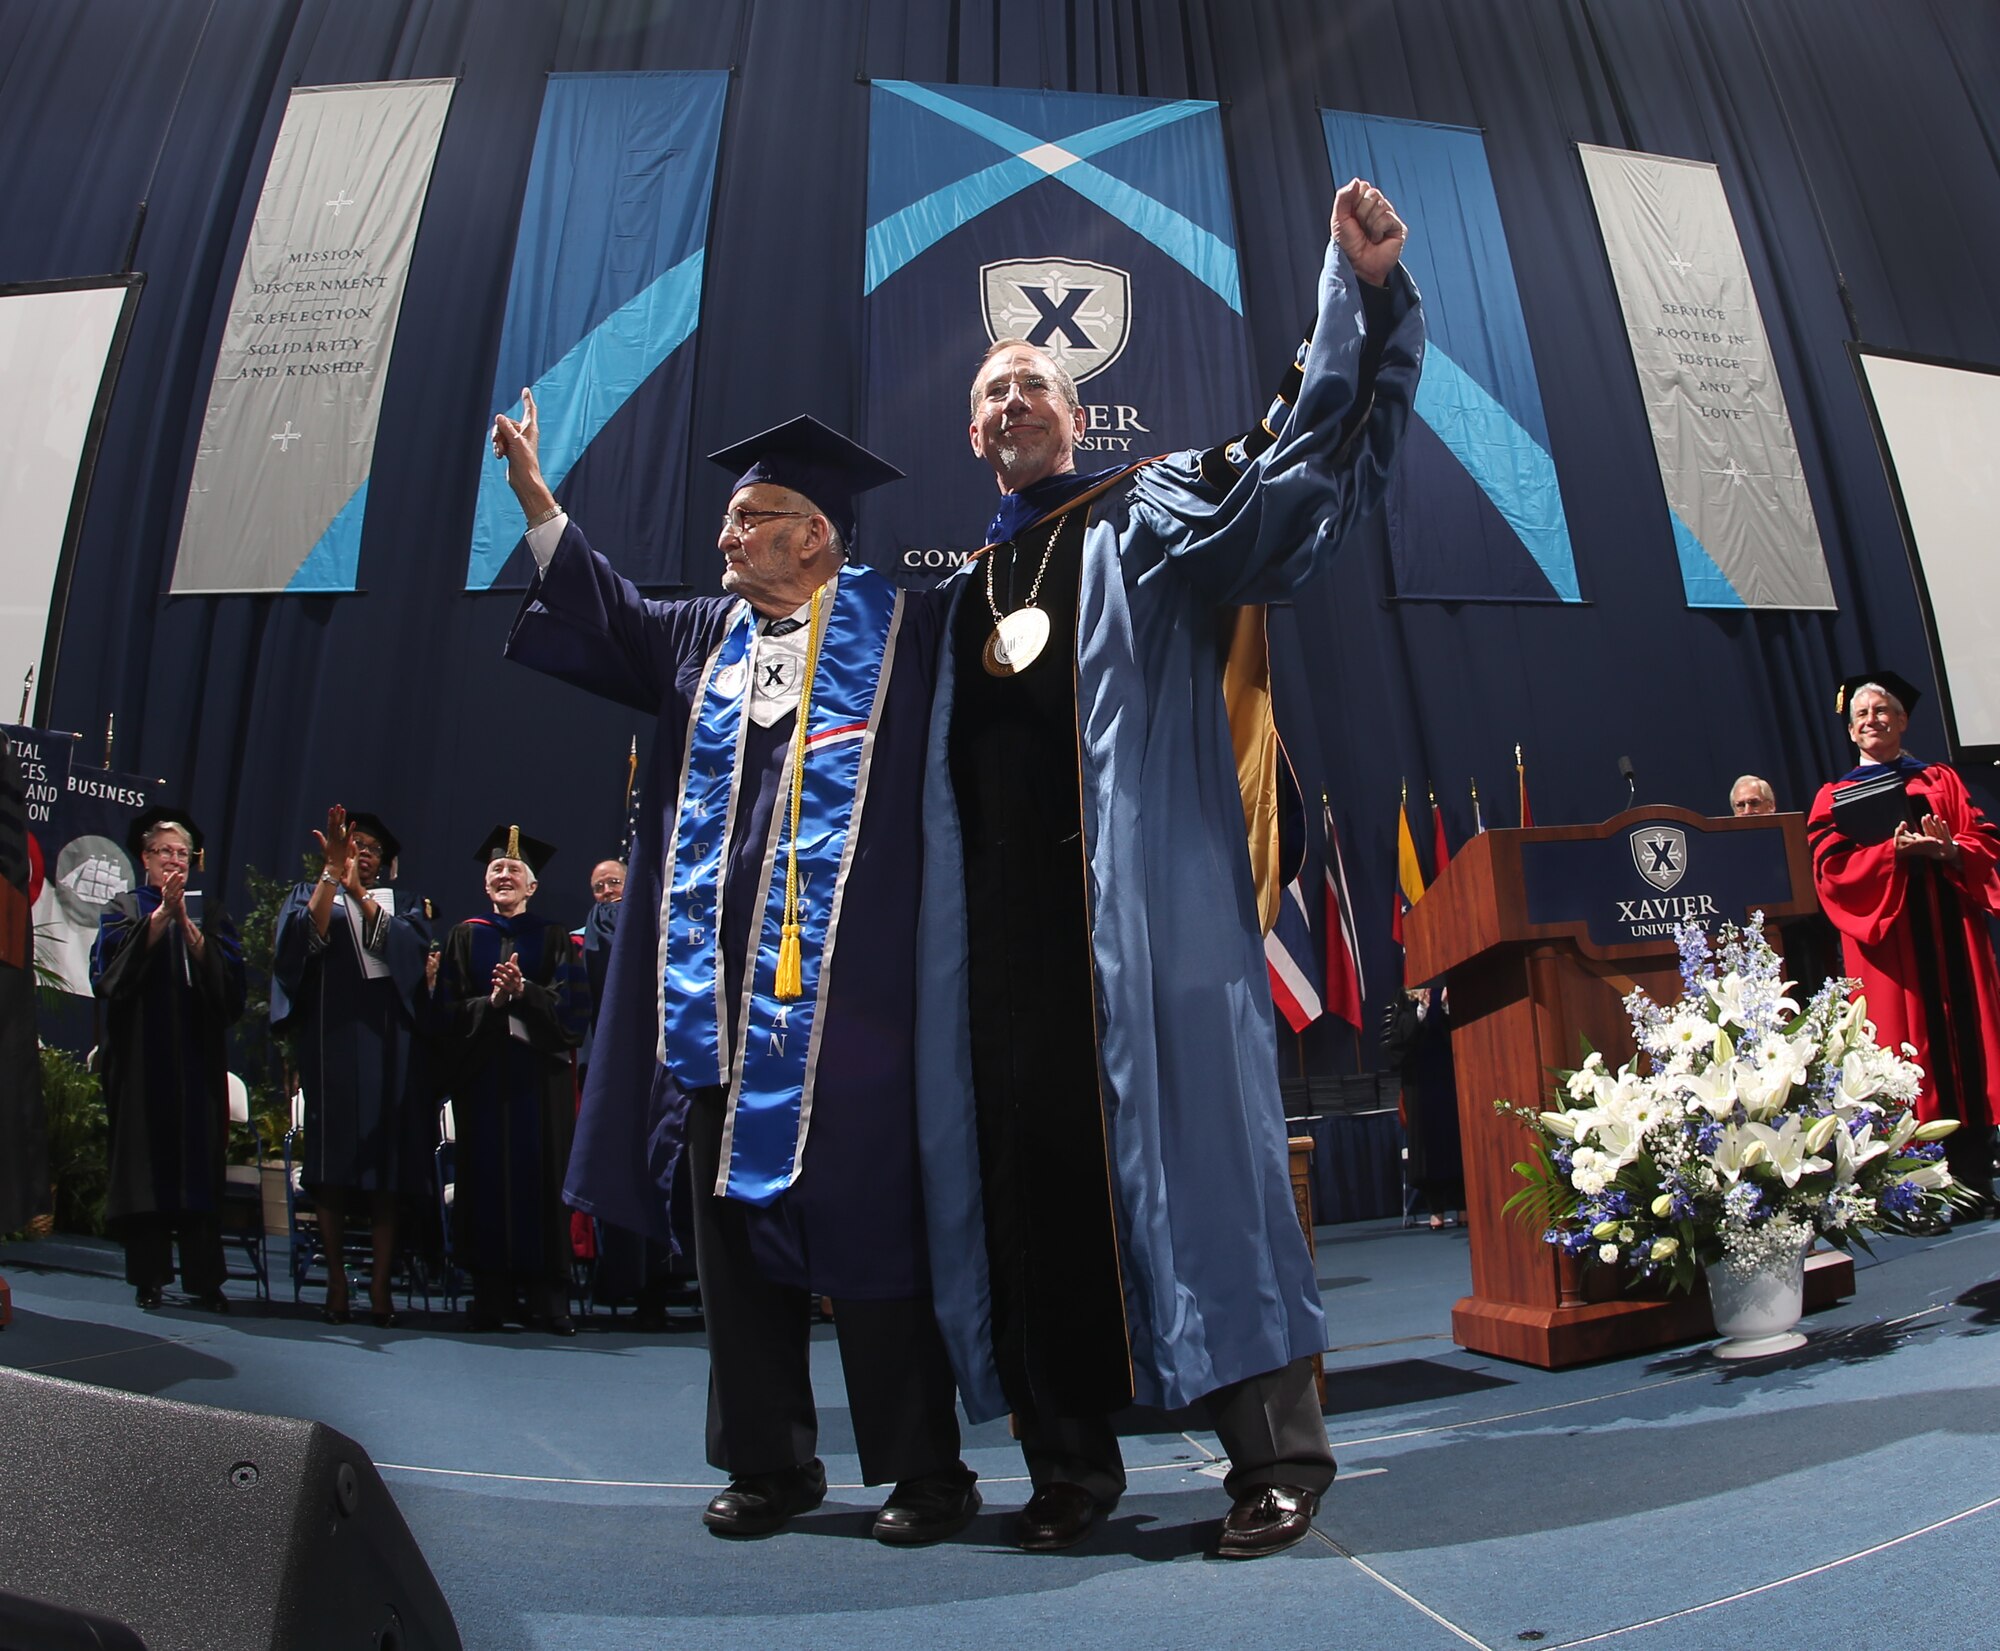 World War II veteran Walter Bunker, left, greets the crowd at Xavier University's 176th commencement along with Xavier University President Michael J. Graham.  Bunker, 90, is believed to be Xavier's oldest undergraduate to receive a degree. (Photo courtesy of Greg Rust, Xavier University)